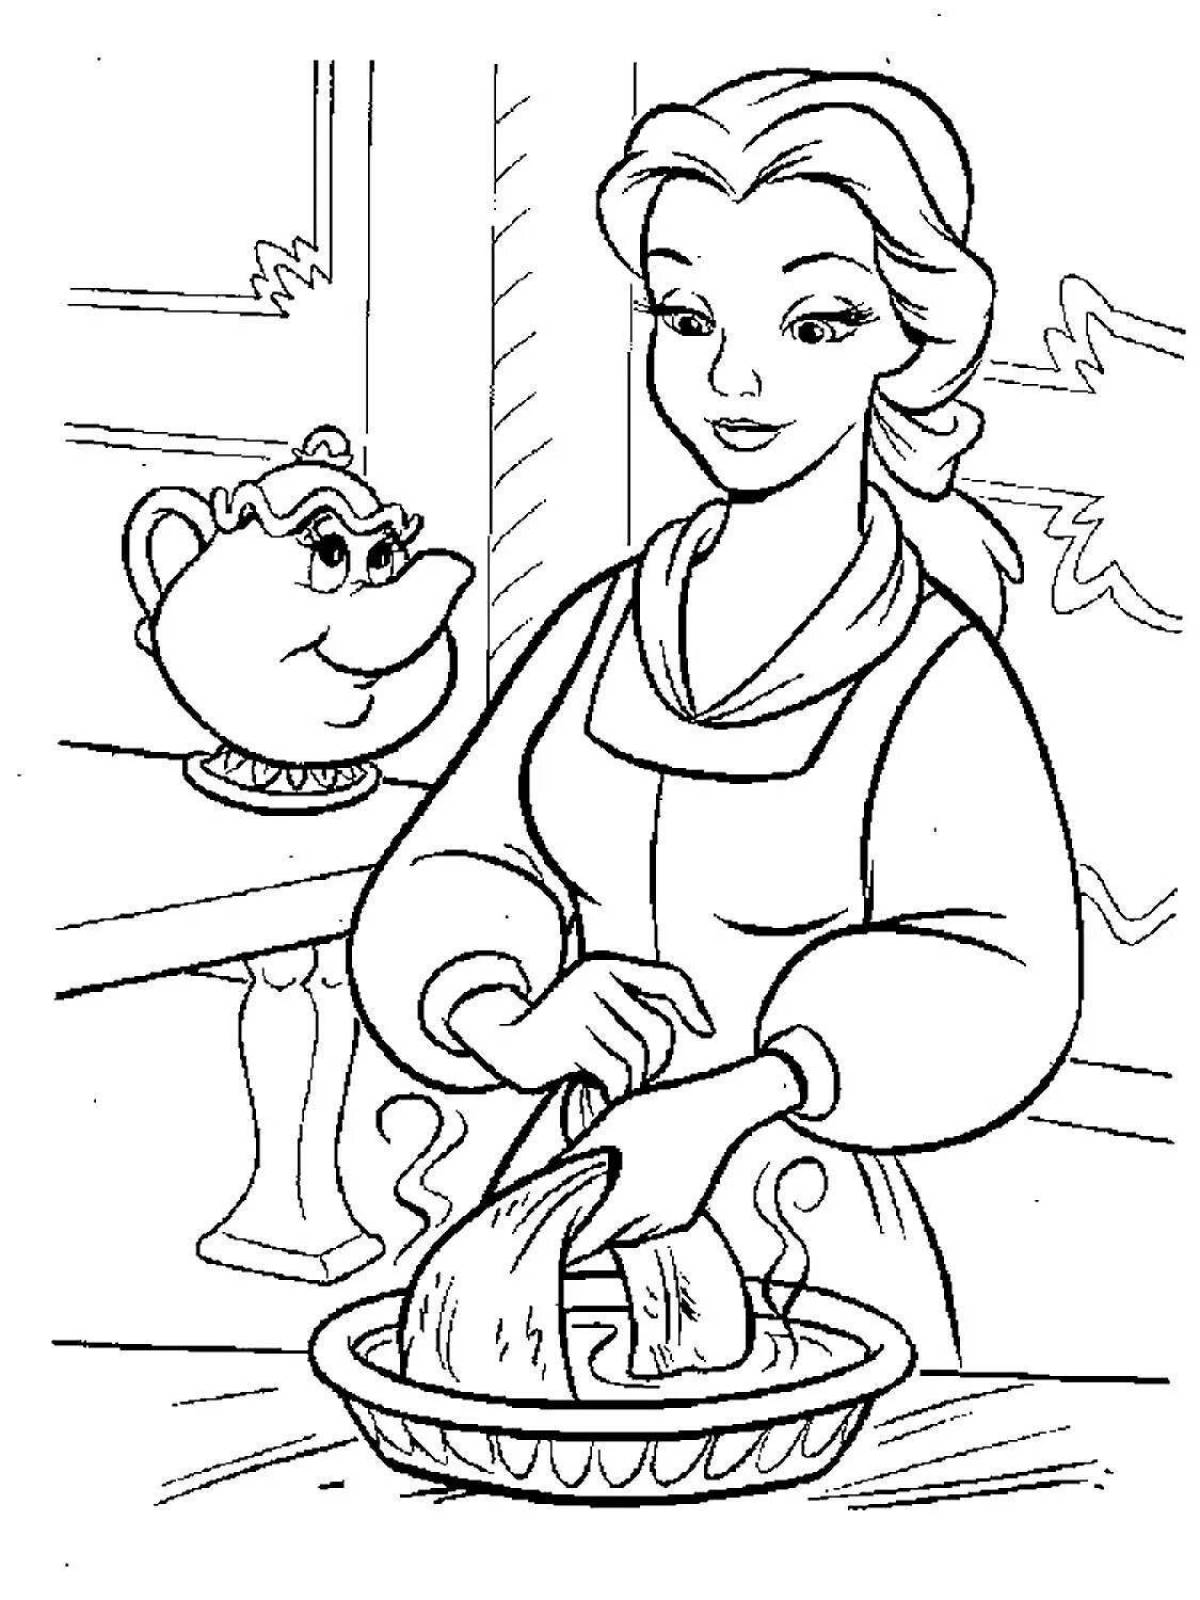 Shiny beauty and the beast coloring pages for kids